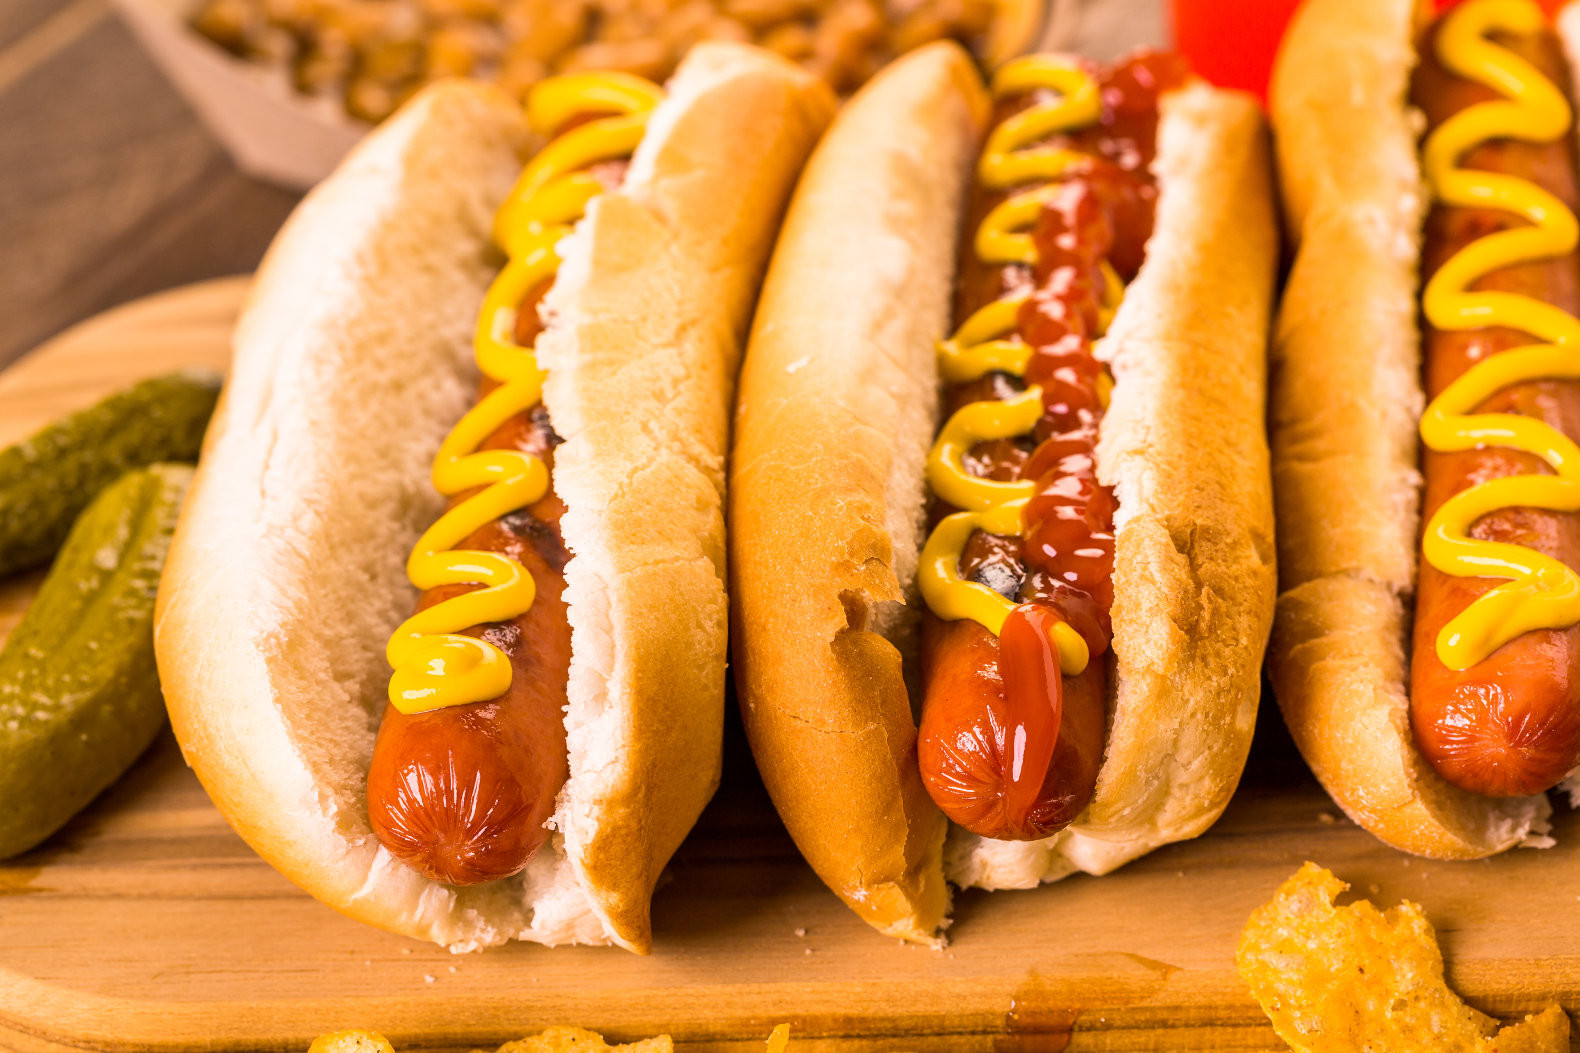 Vegan Hot Dogs
 Lab finds real meat in one in ten "ve arian" hot dogs